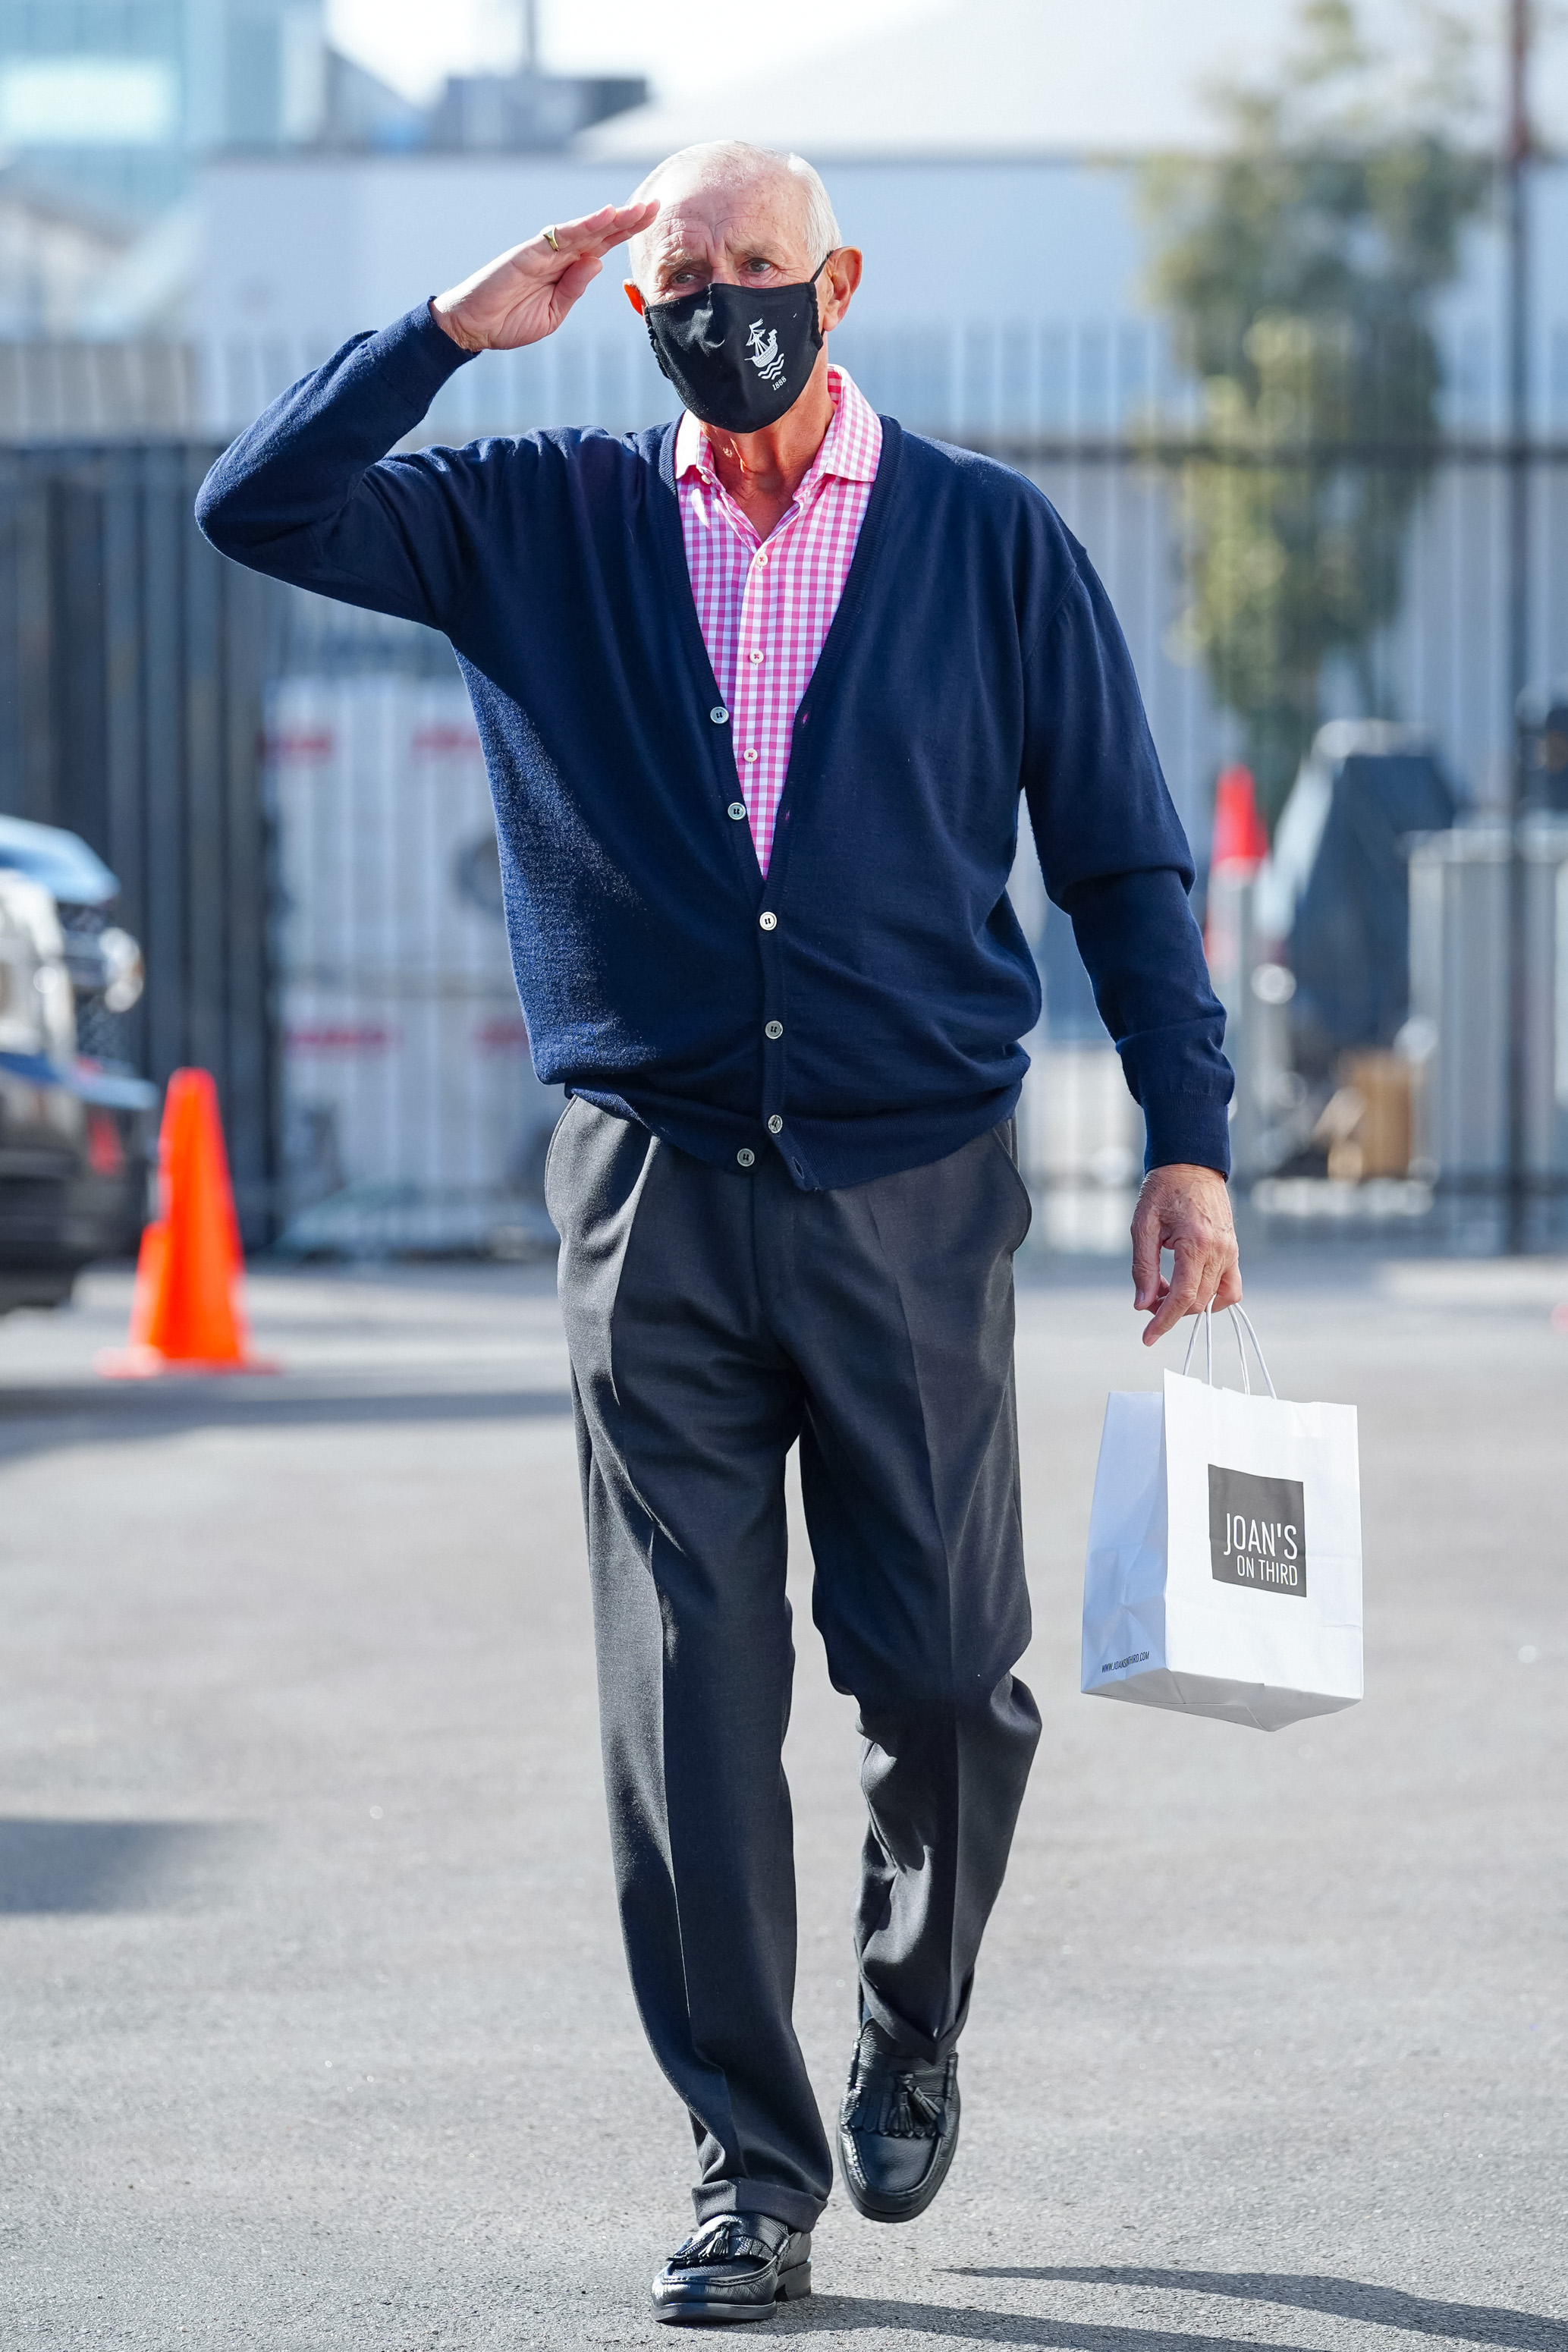 Len Goodman spotted at the "Dancing with the Stars" rehearsal studio in Los Angeles, 2021 | Source: Getty Images